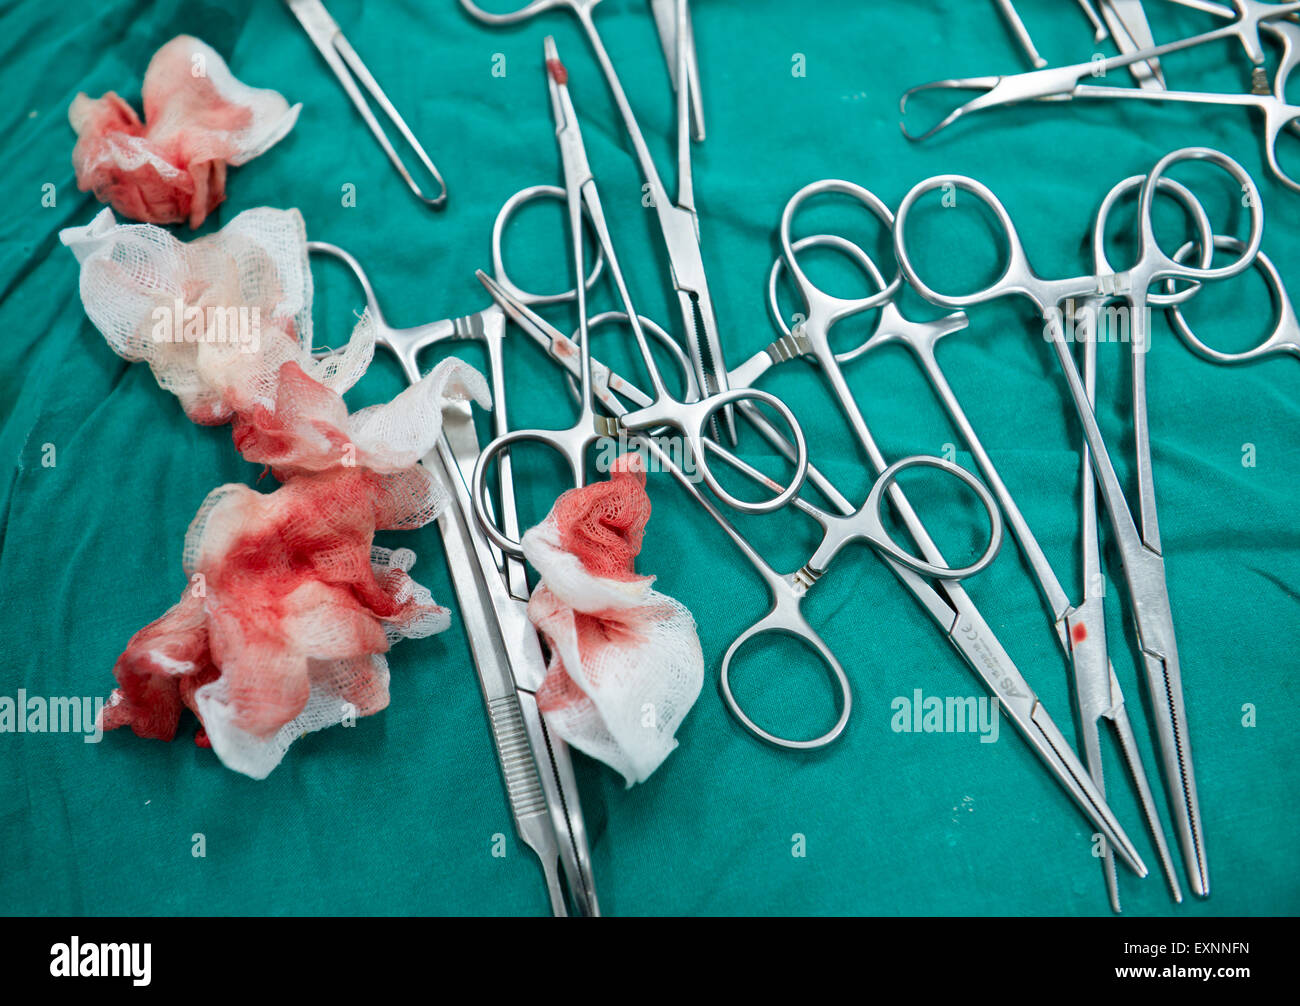 surgery equipment on table in the operating room Stock Photo